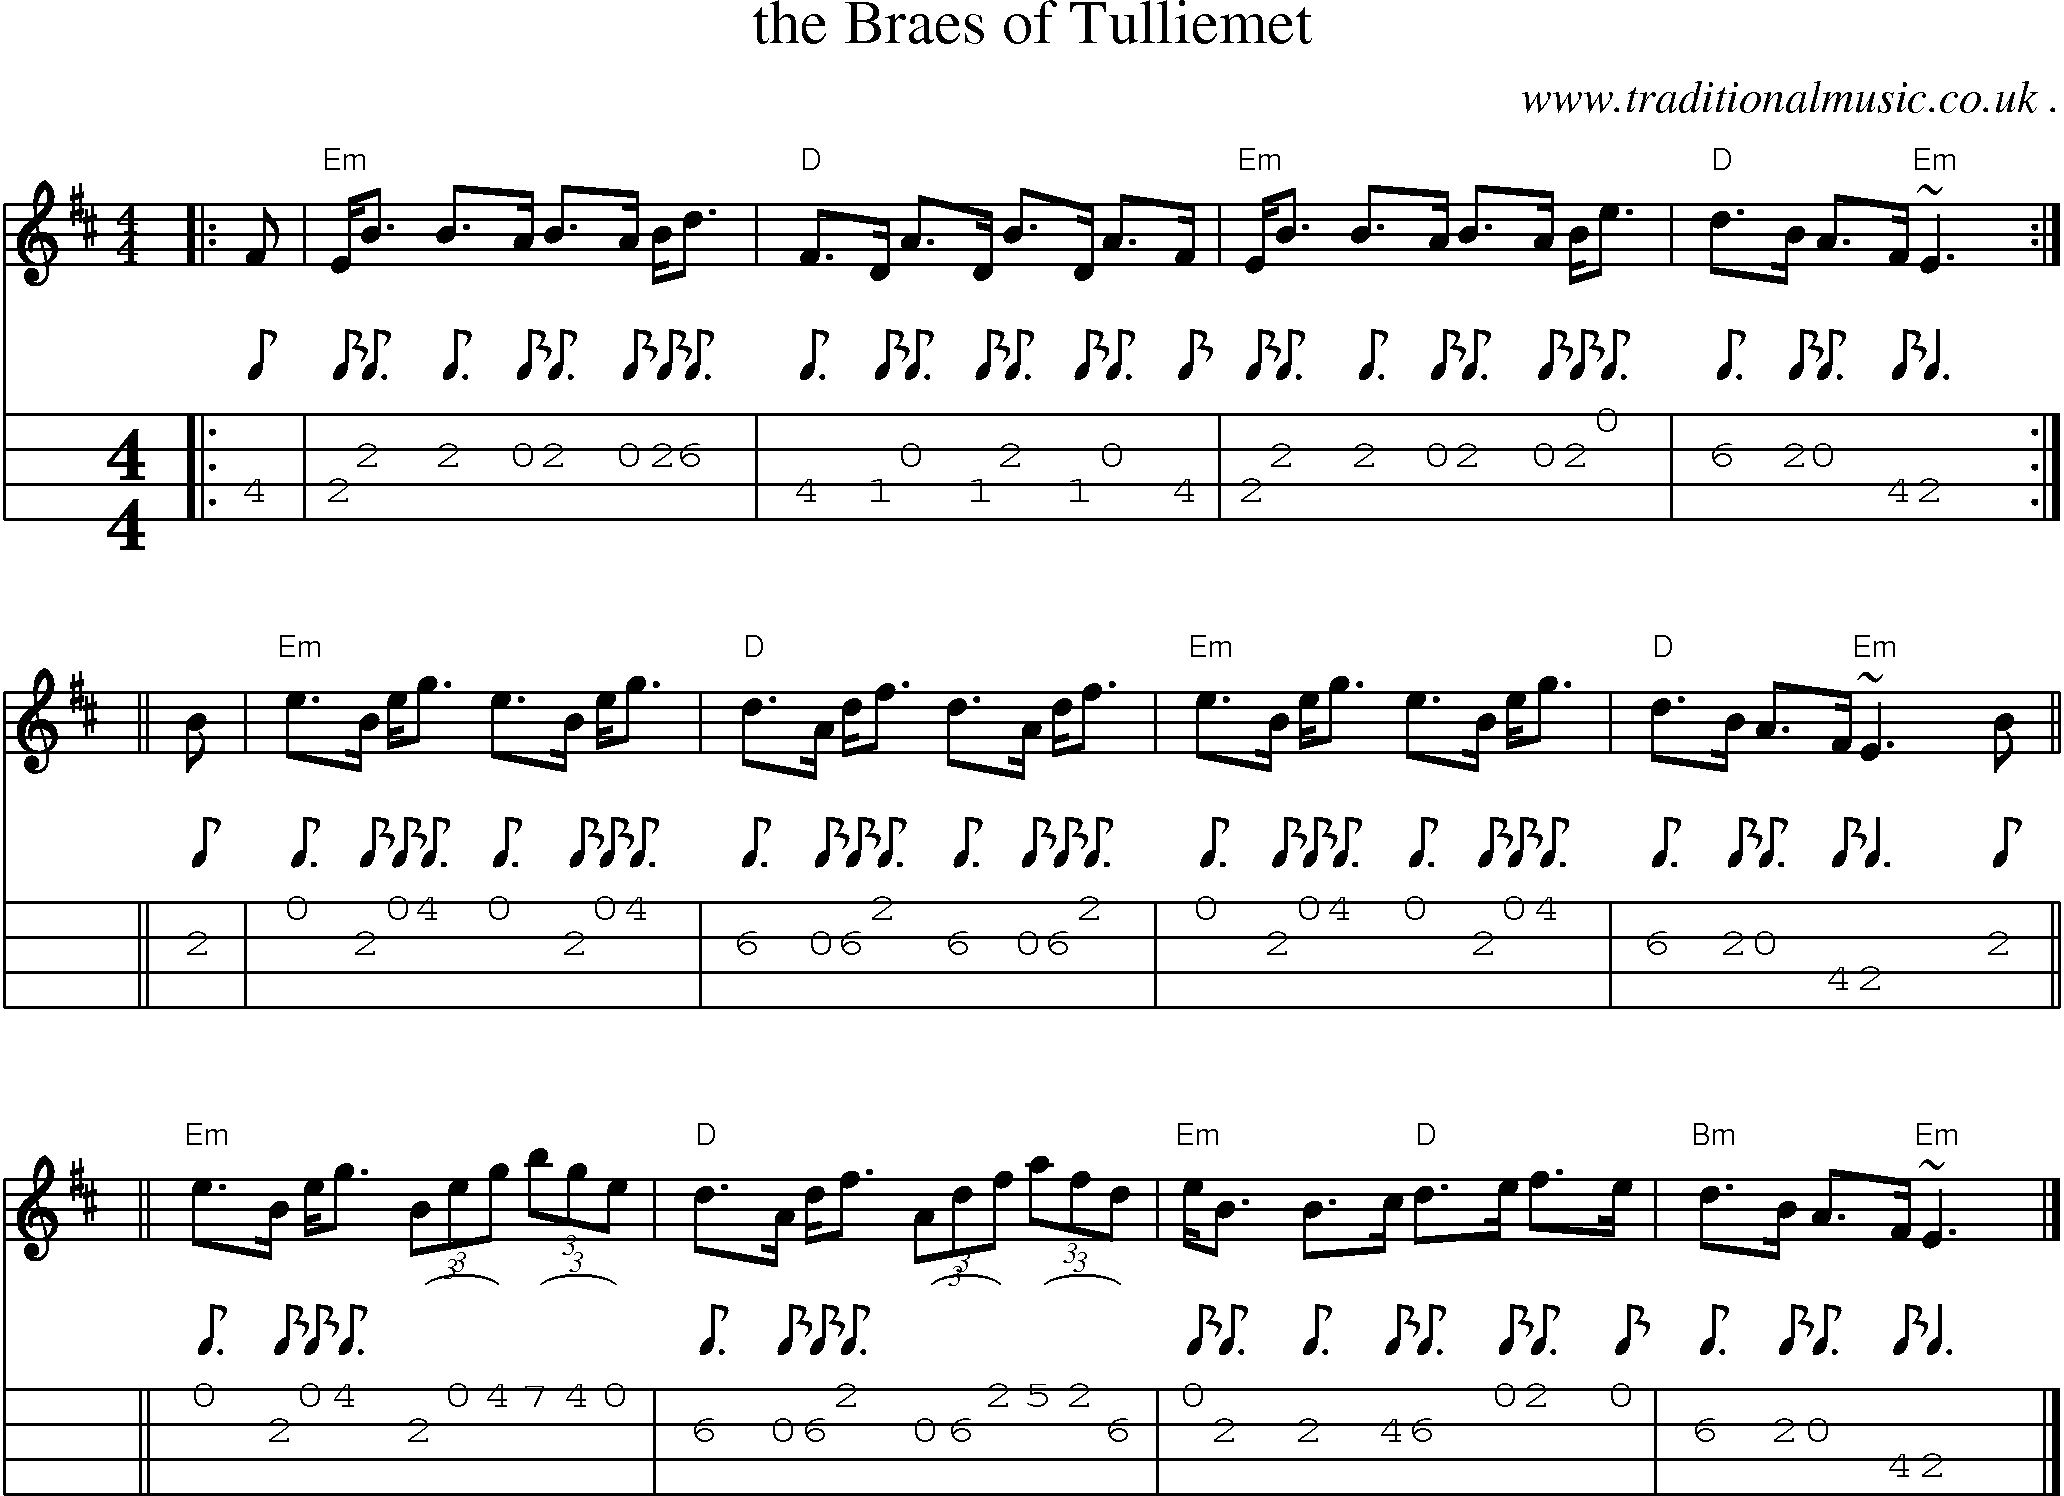 Sheet-music  score, Chords and Mandolin Tabs for The Braes Of Tulliemet